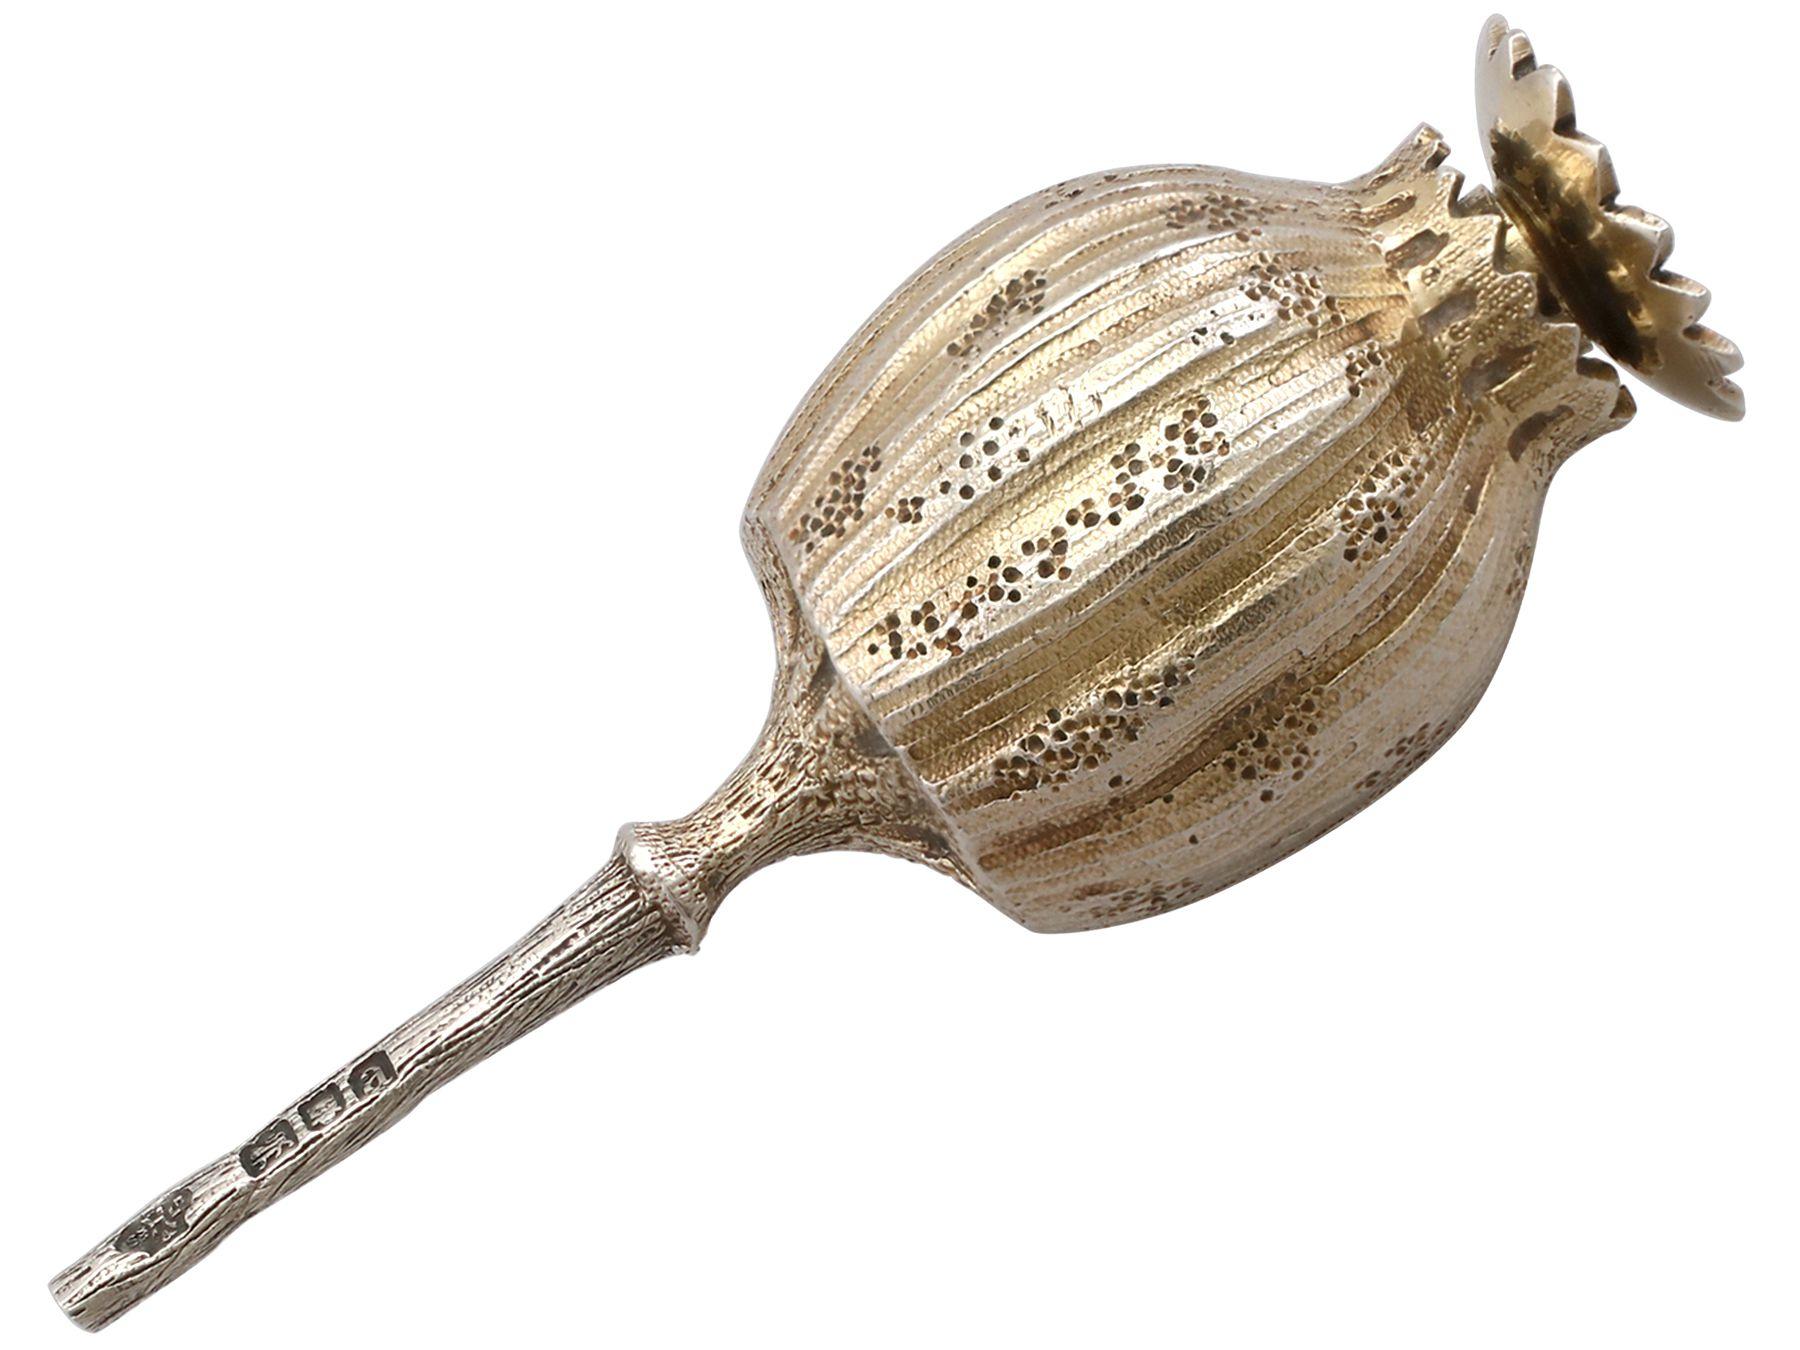 An exceptional, fine and impressive antique Victorian English sterling silver gilt pomander; an addition to our ornamental silverware collection

This exceptional, fine and impressive antique Victorian cast sterling silver gilt pomander has been